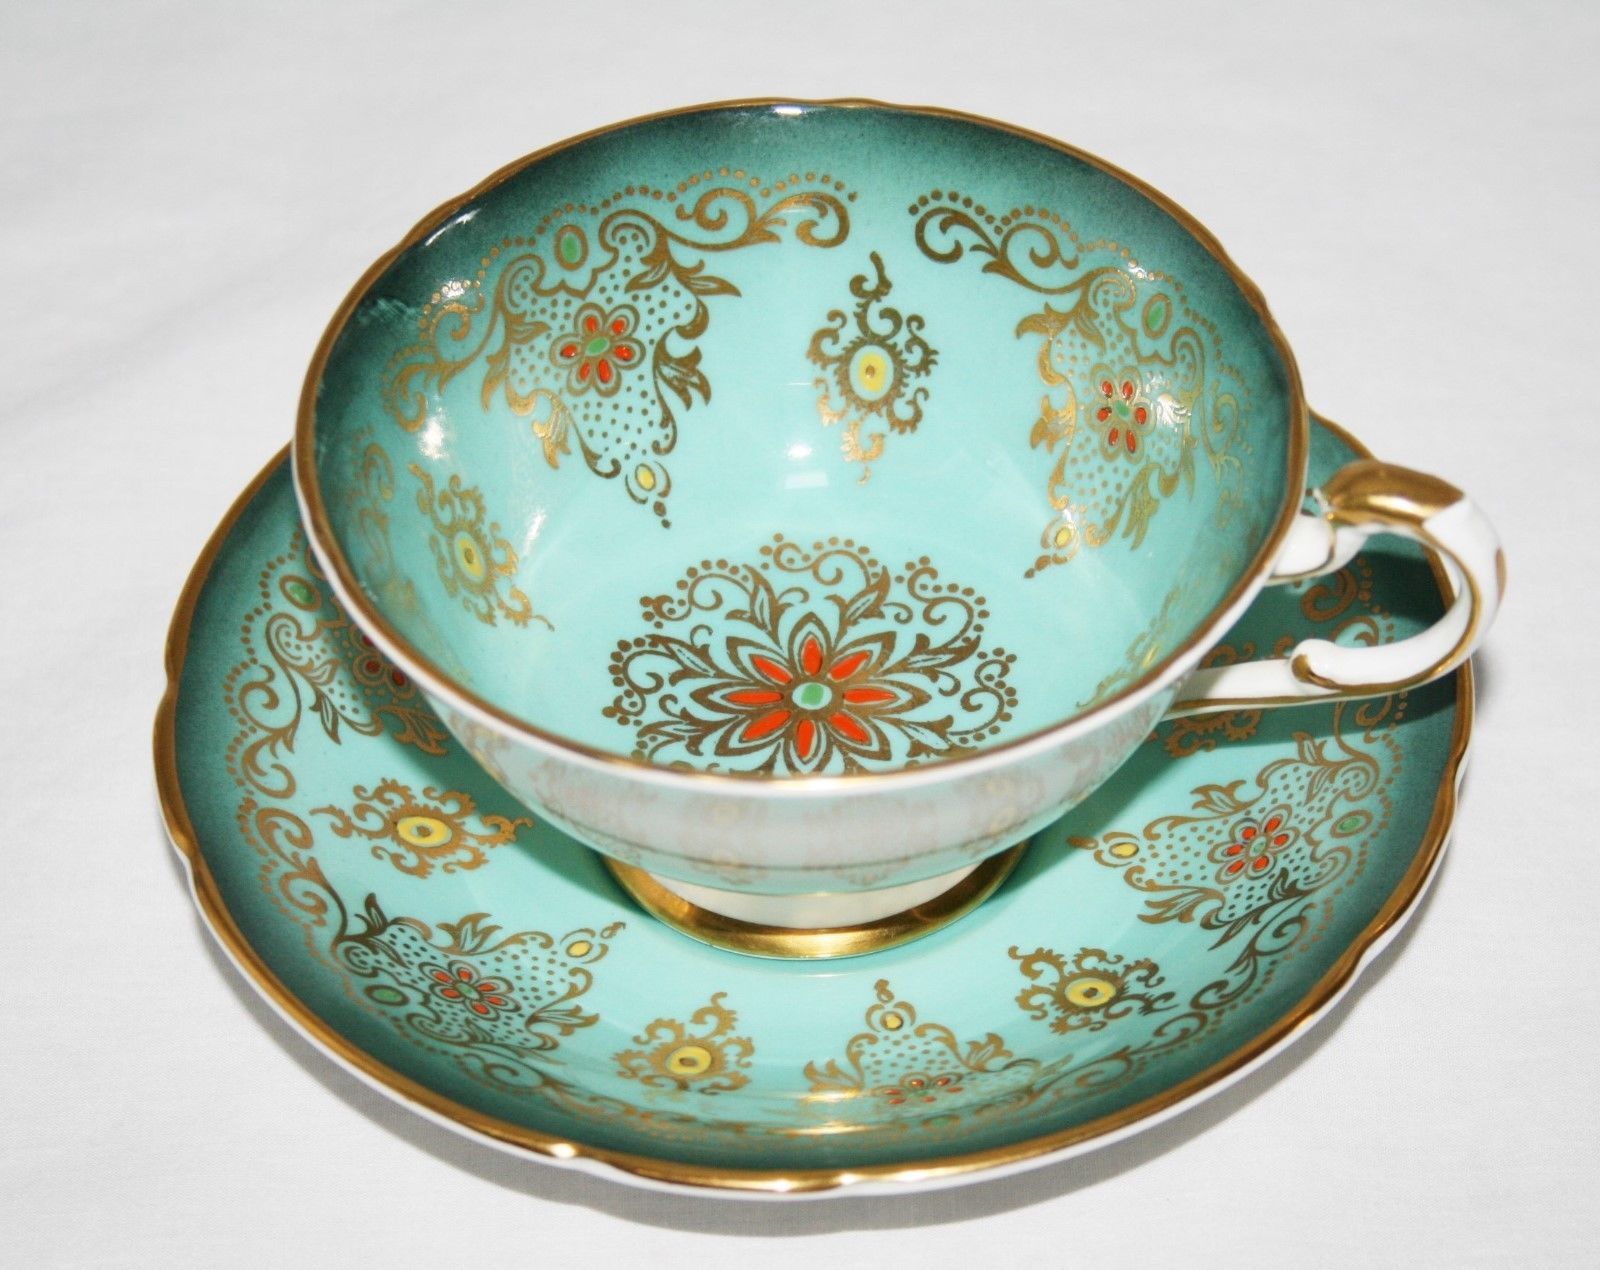 Lovely Teal Green Border with Floral Center Grosvenor Tea Cup and Saucer Set 